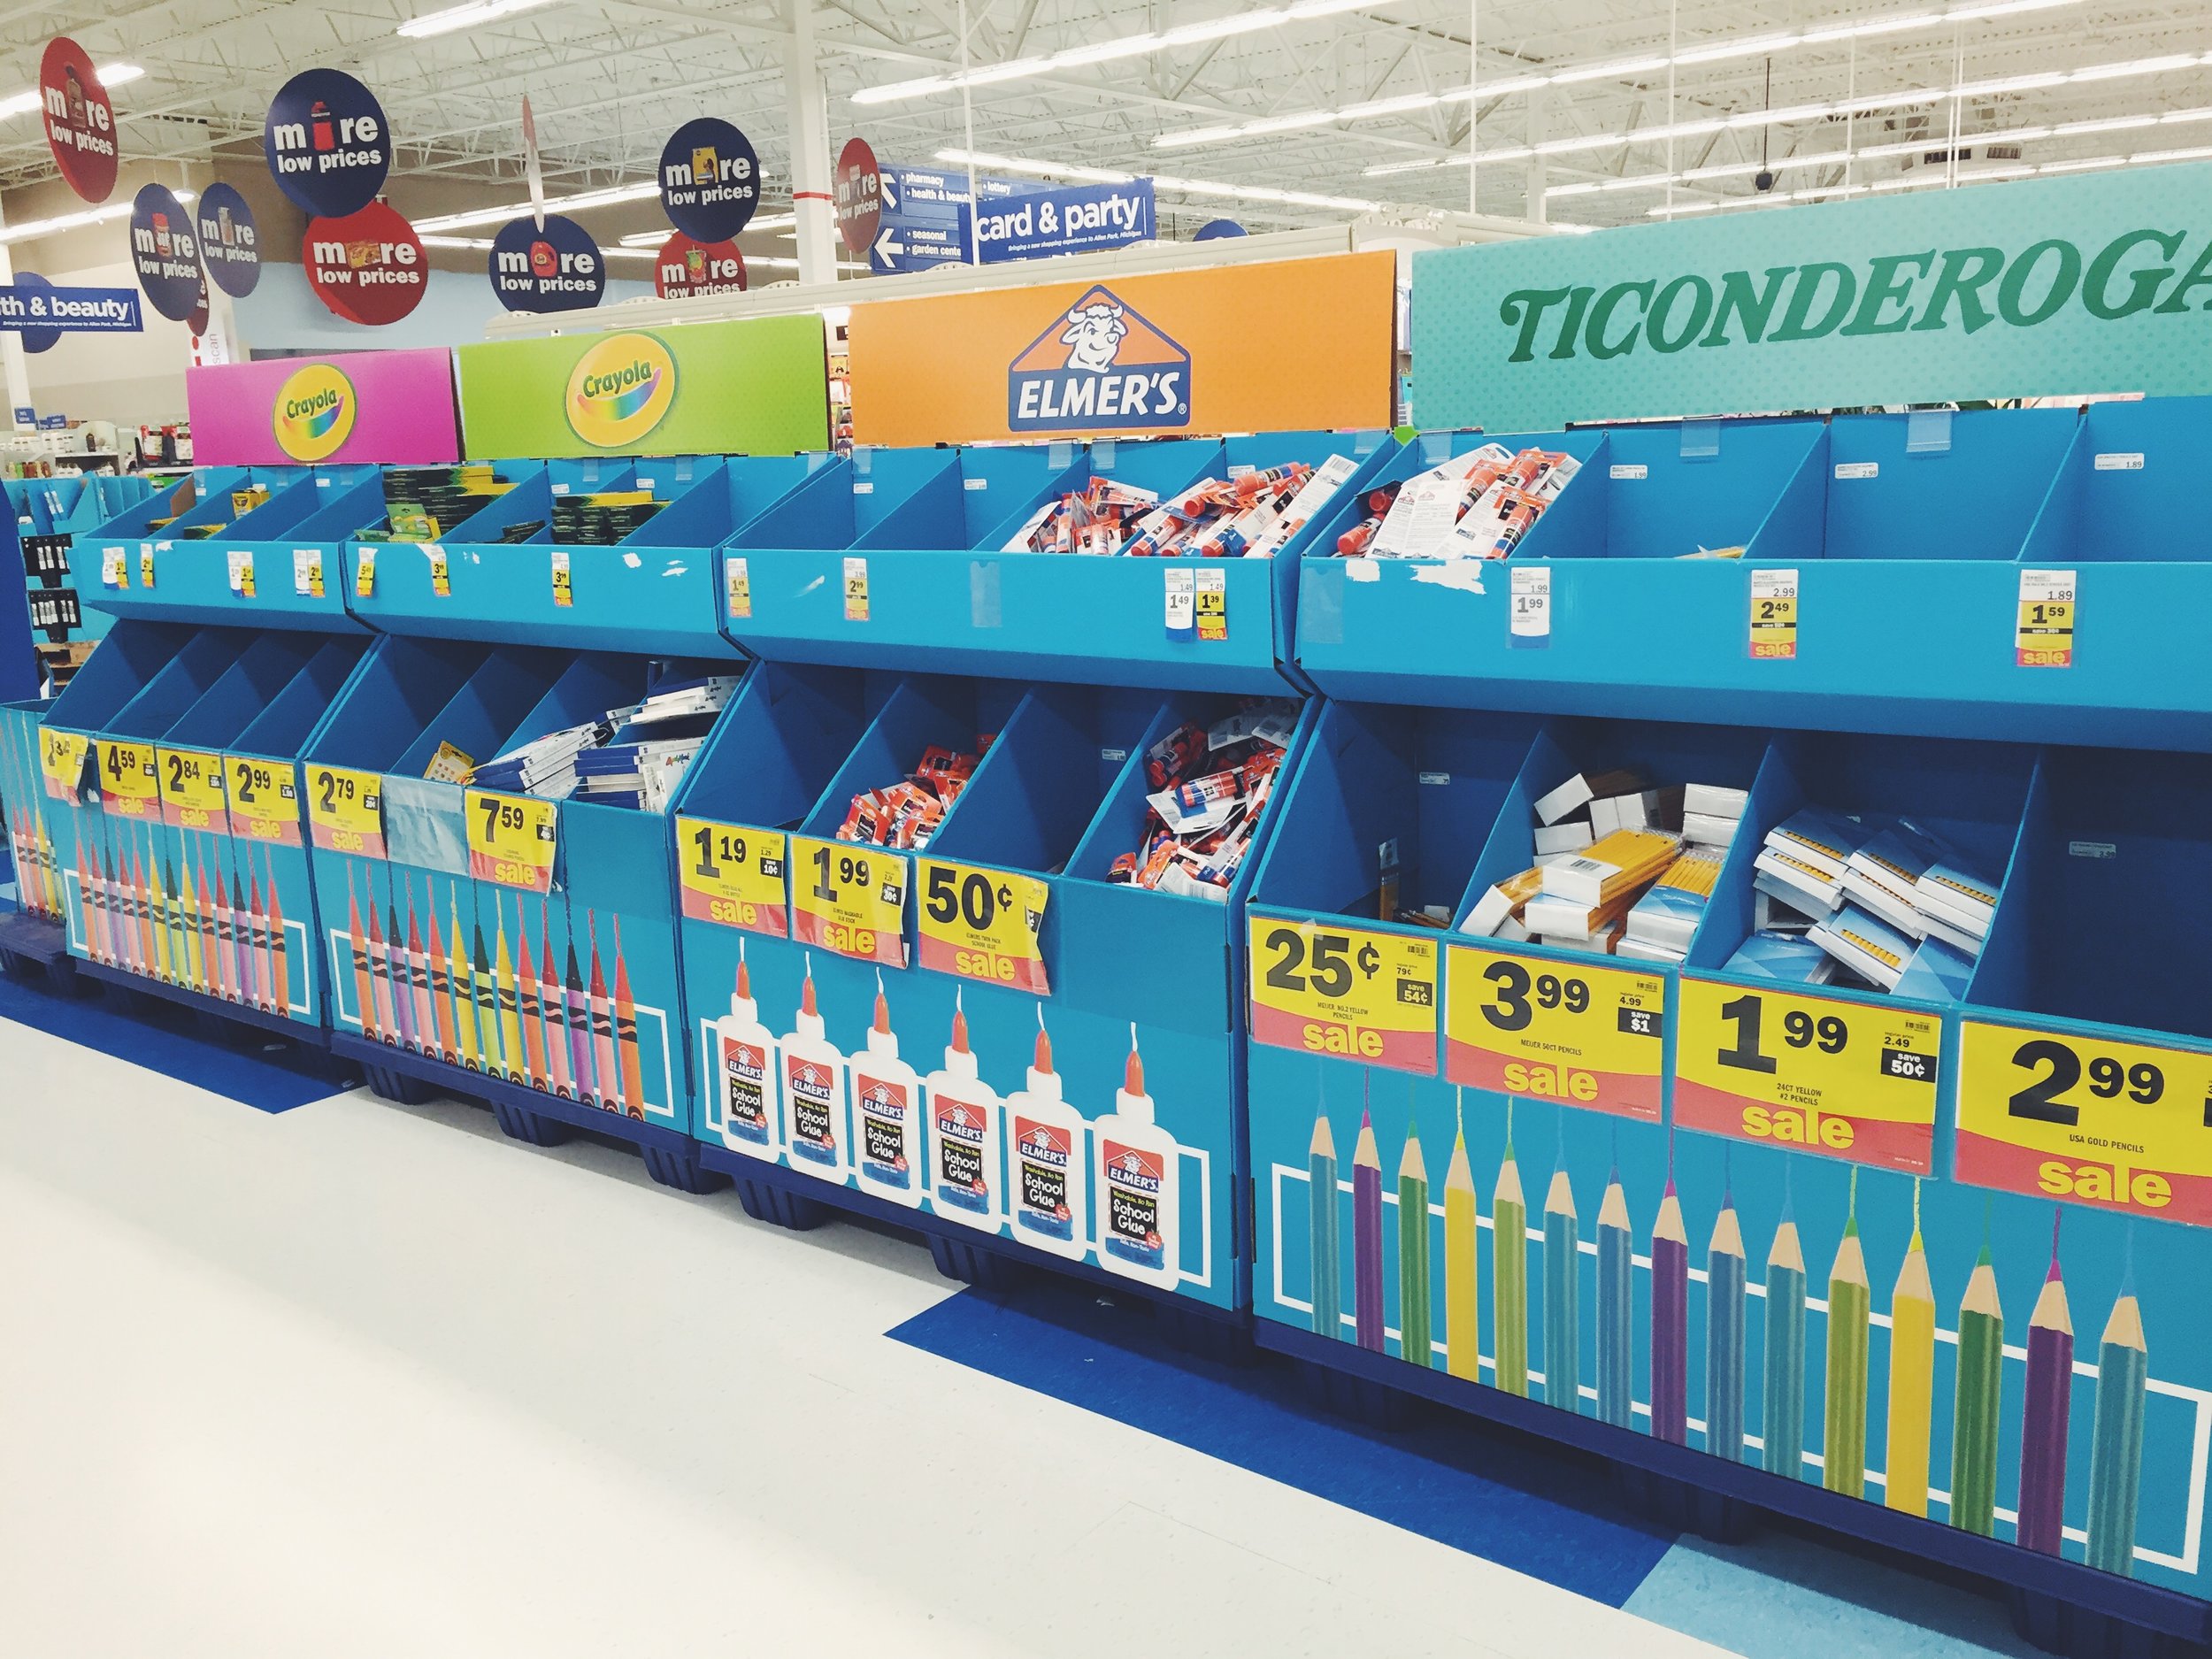 Meijer continues teacher discount on school supplies for entire